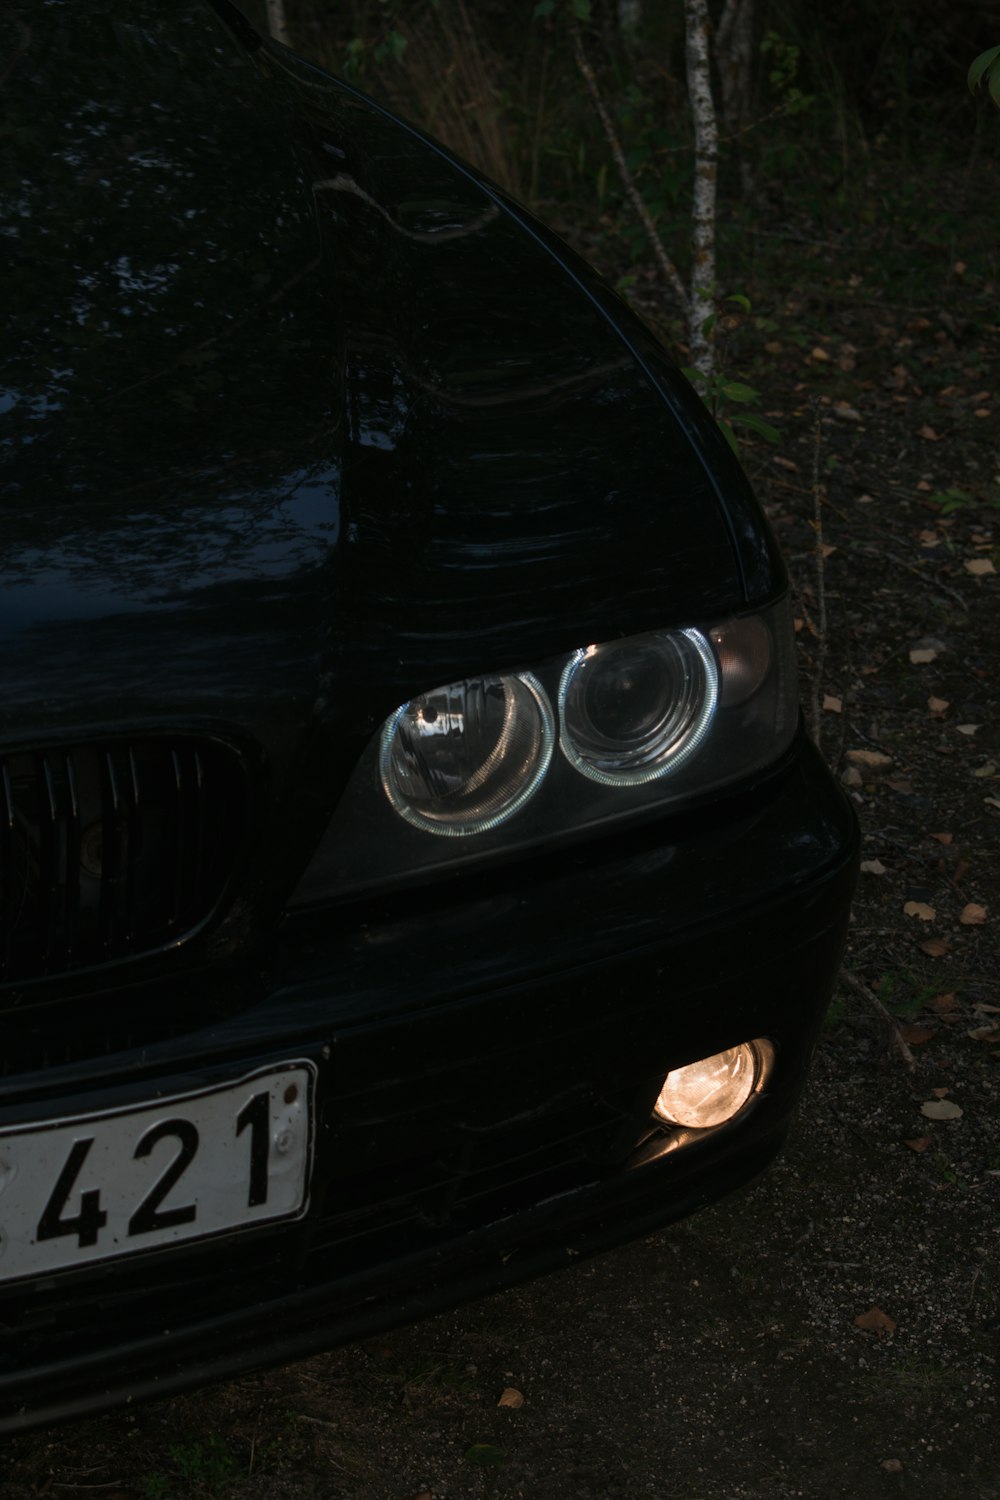 a close up of the headlights of a black car